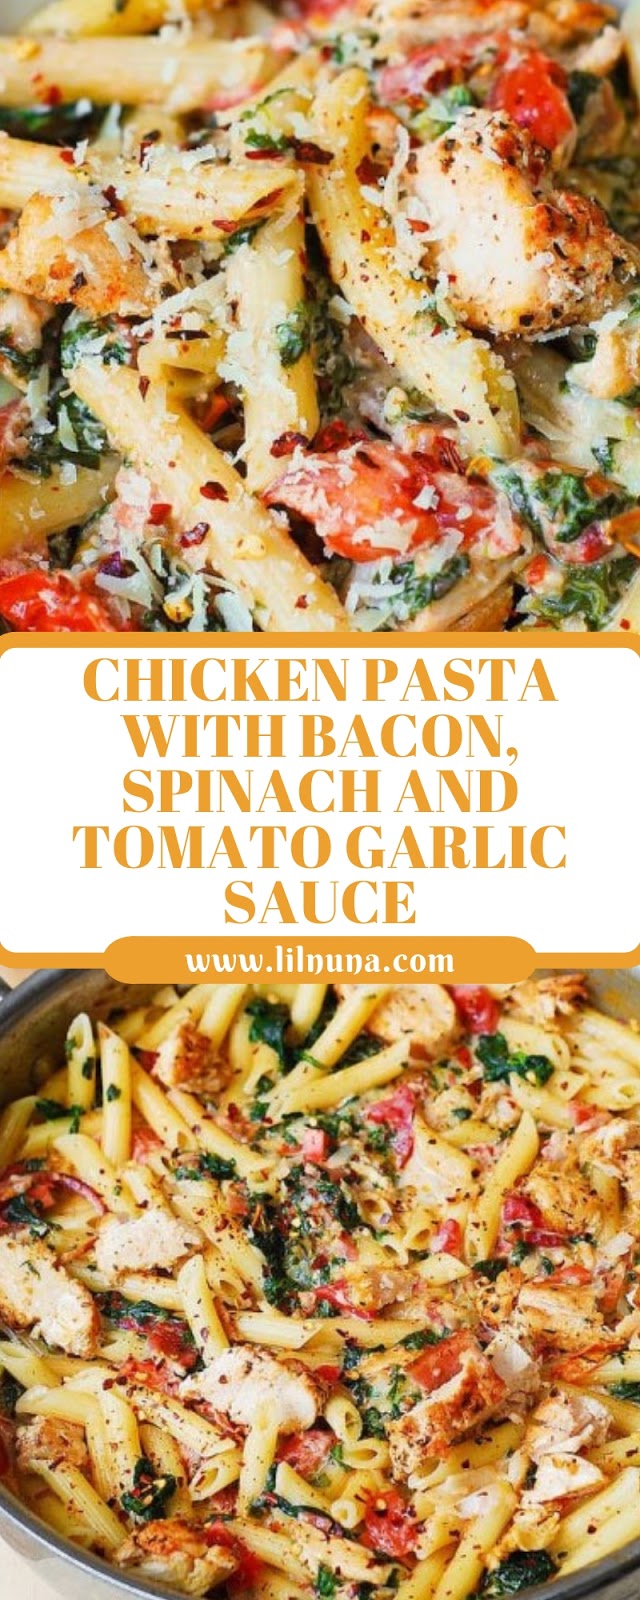 CHICKEN PASTA WITH BACON, SPINACH AND TOMATO GARLIC SAUCE